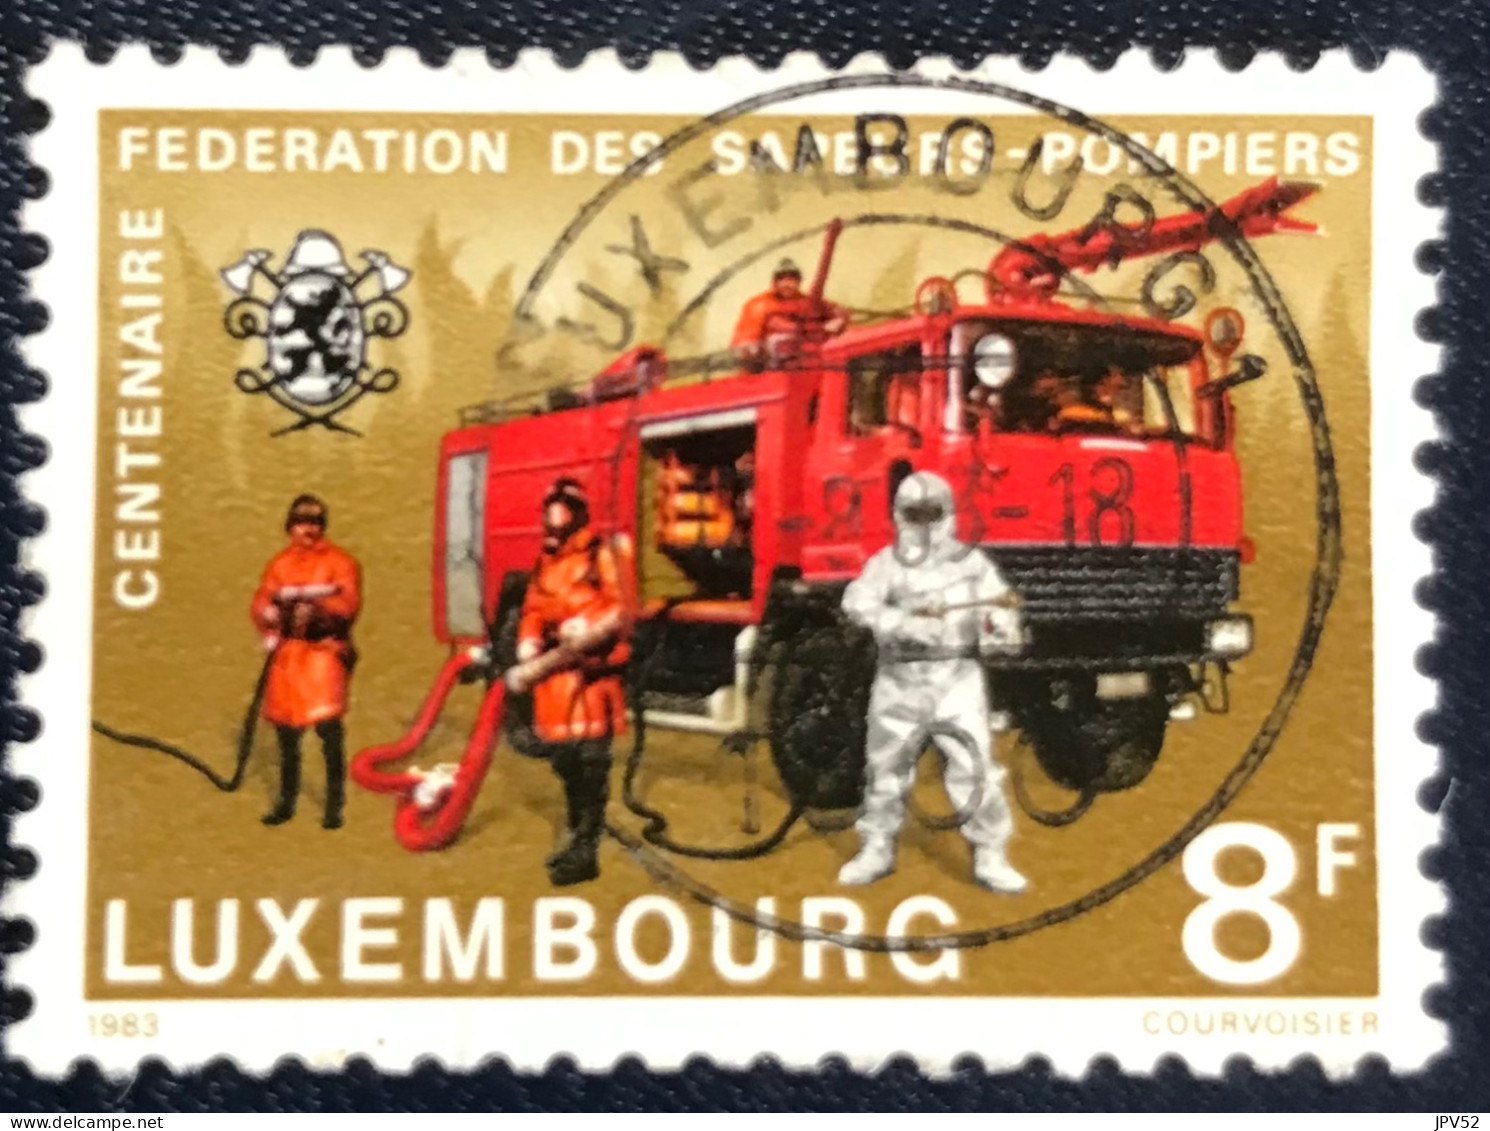 Luxembourg - Luxemburg - C18/31 - 1983 - (°)used - Michel 1068 - 100j Brandweer - Used Stamps